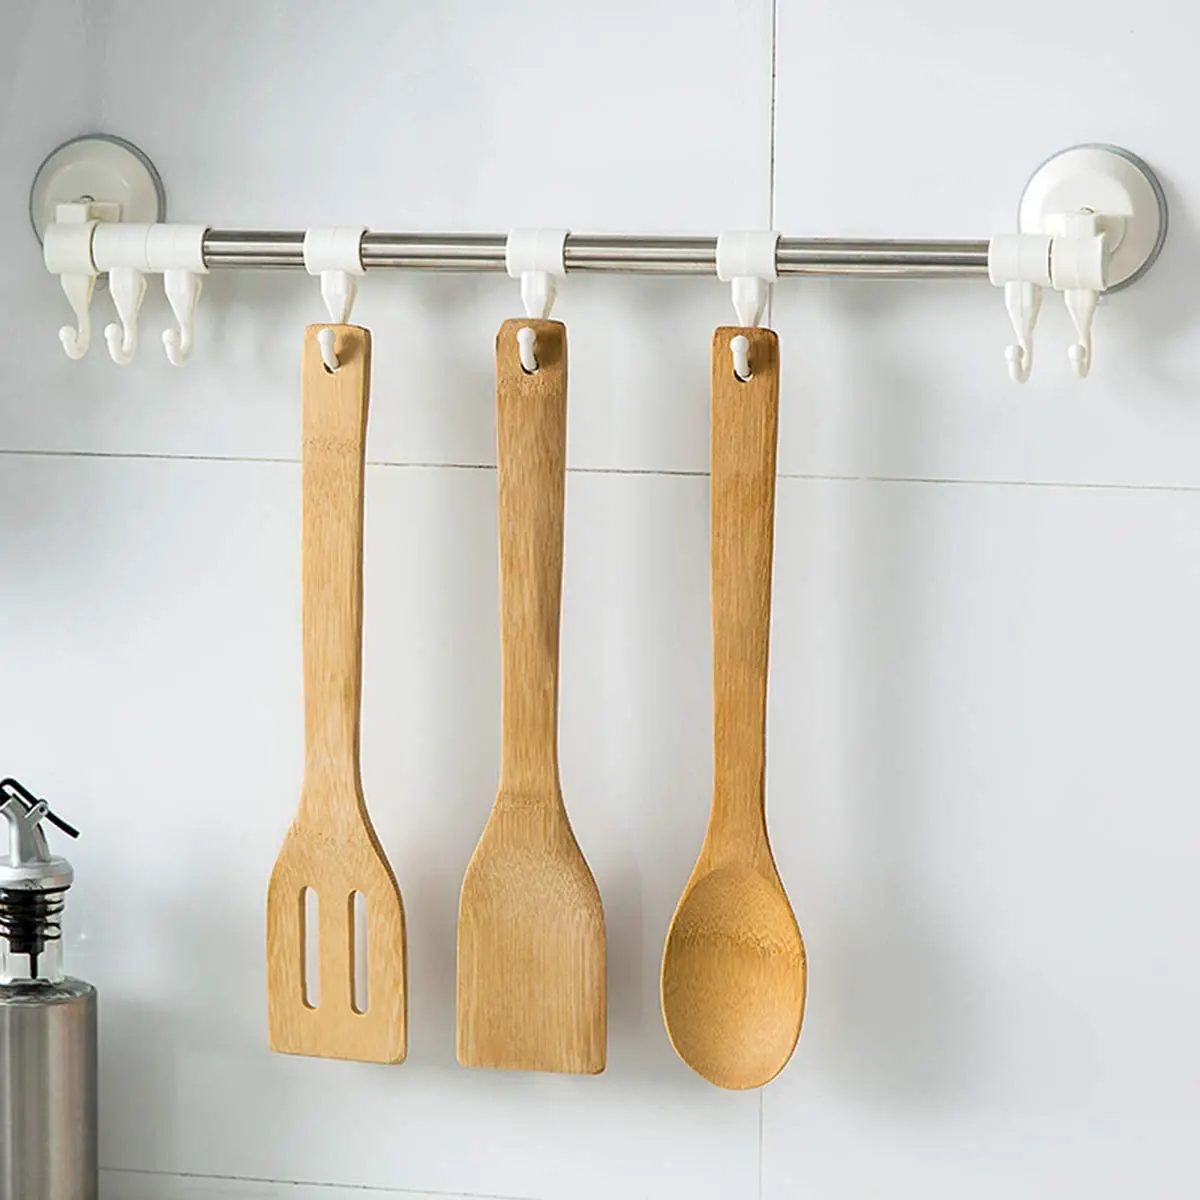 Bamboo Utensils Set - 9 Pack Kitchen Utensils Set with Holder Bamboo Spoons Spatula for Cooking utensils